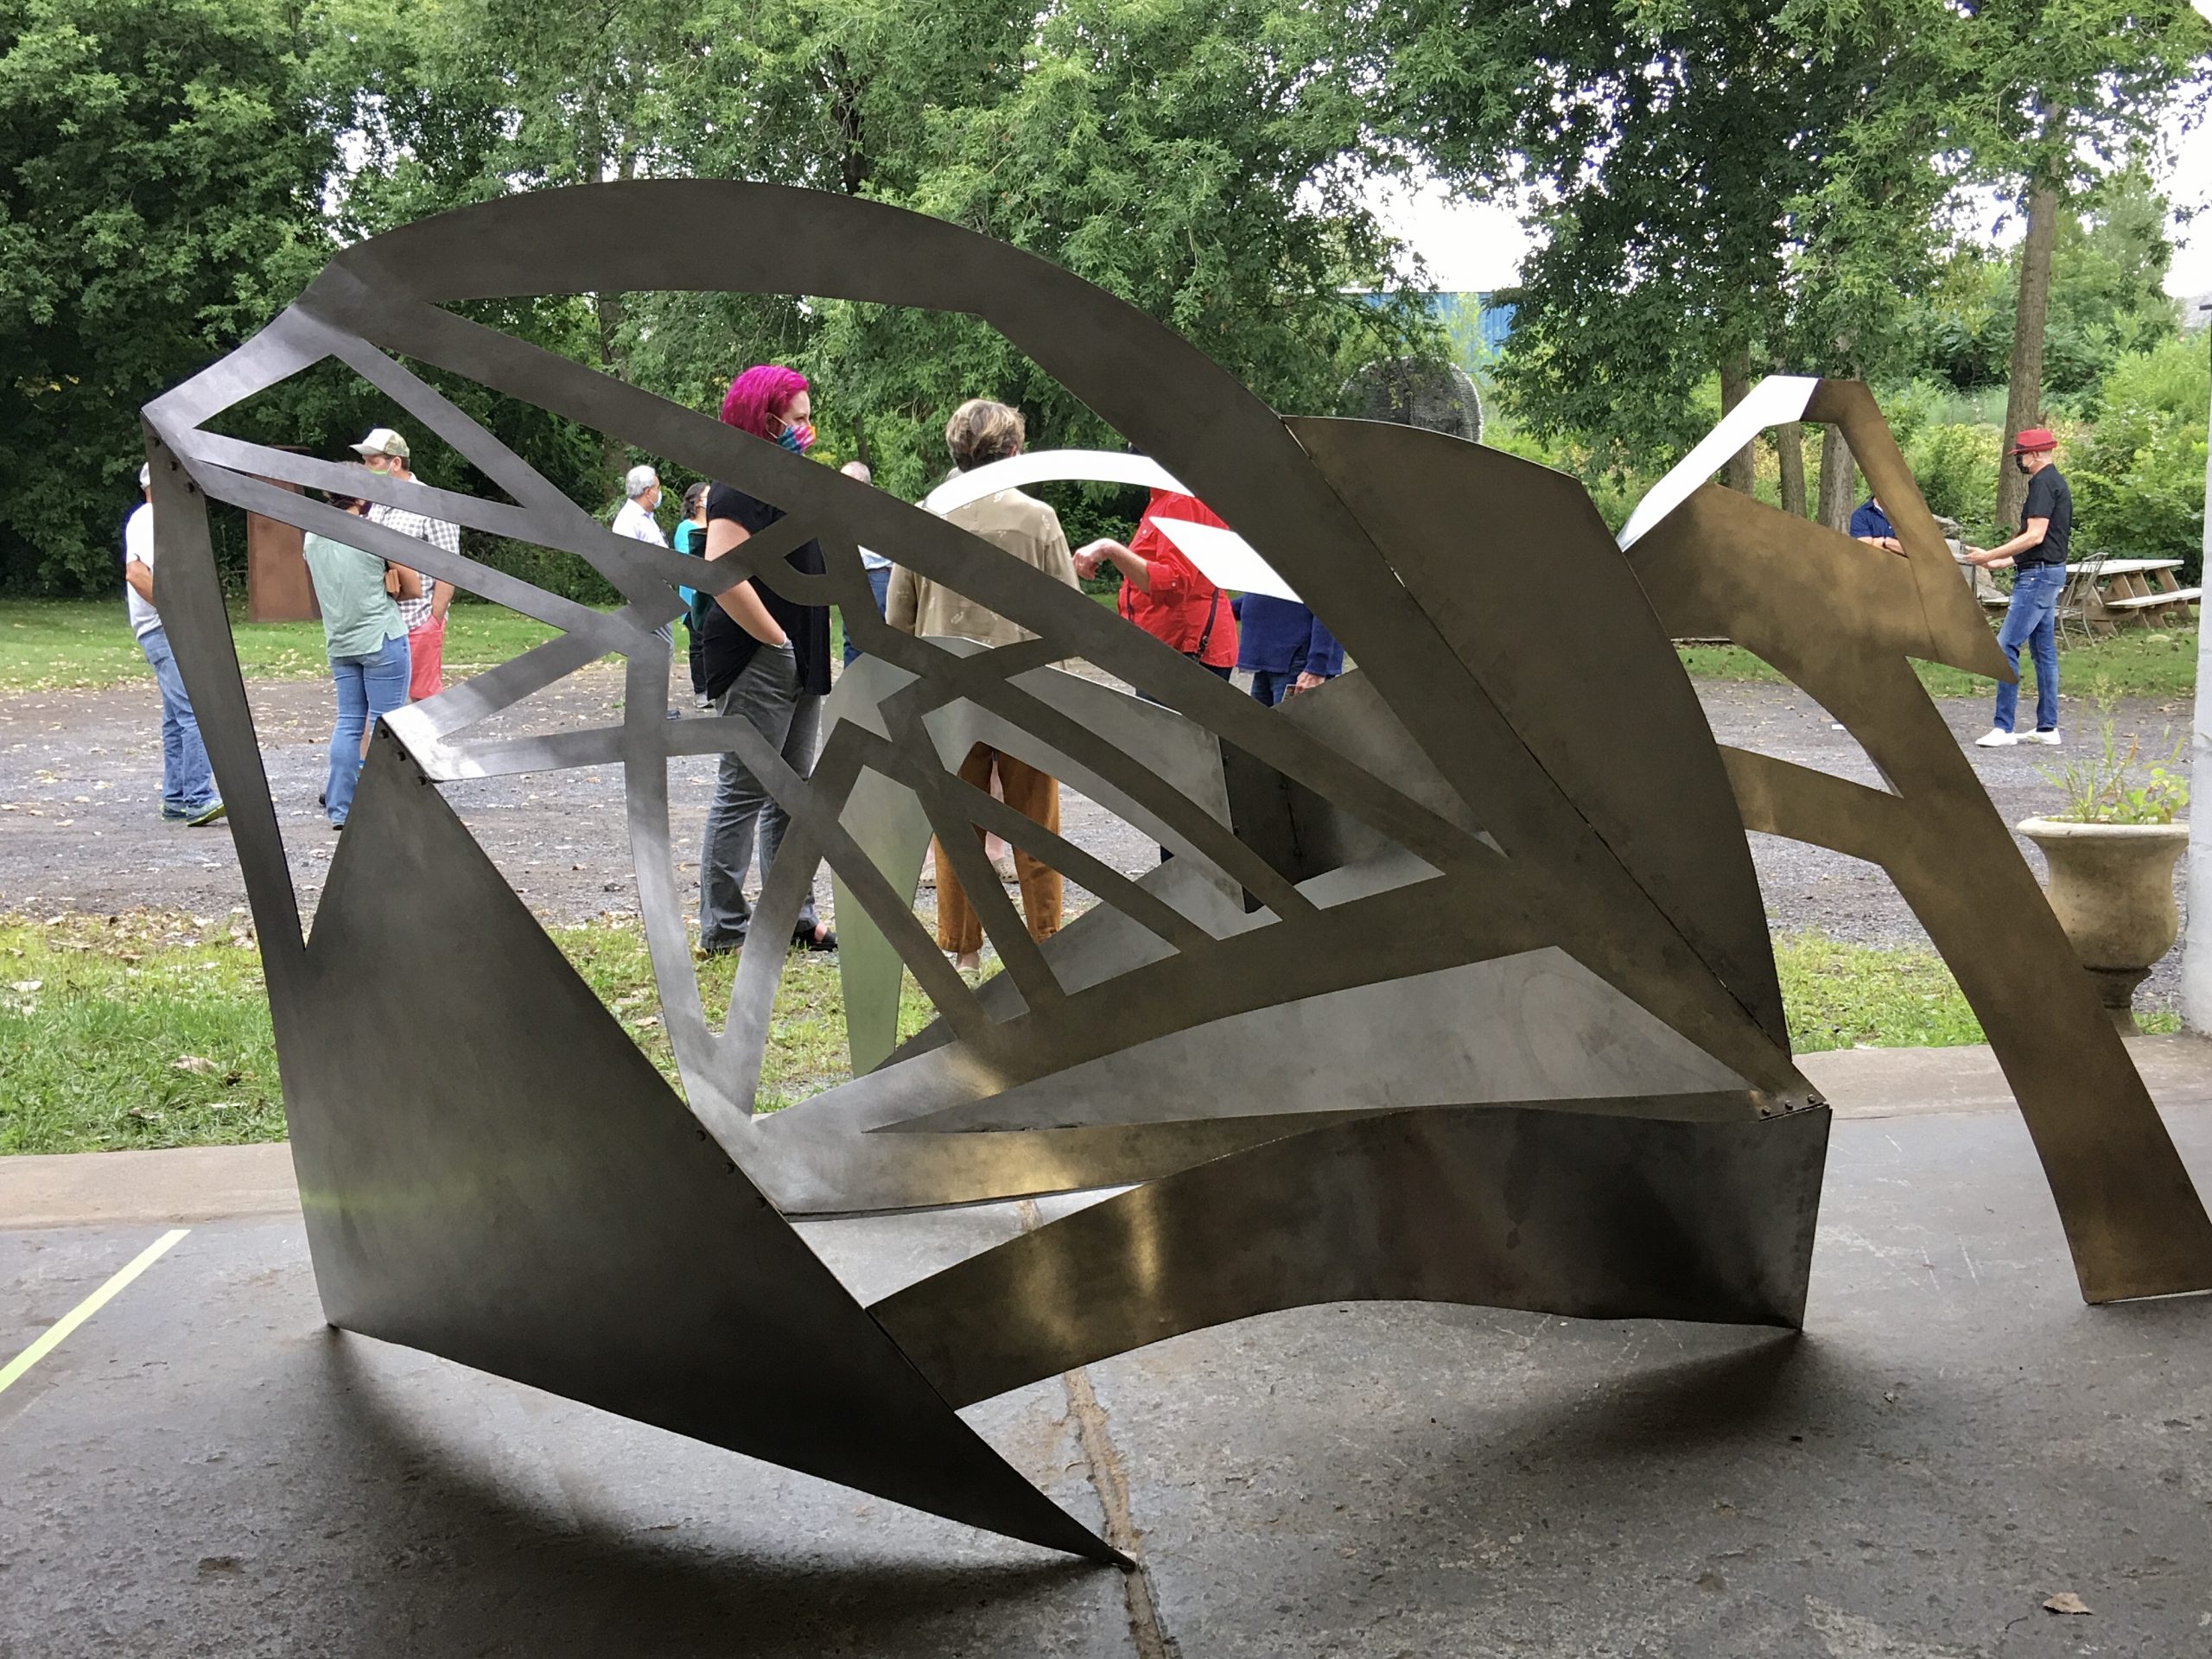 Unification, 12 gauge stainless steel, 6’x 9’x 7’, 2020